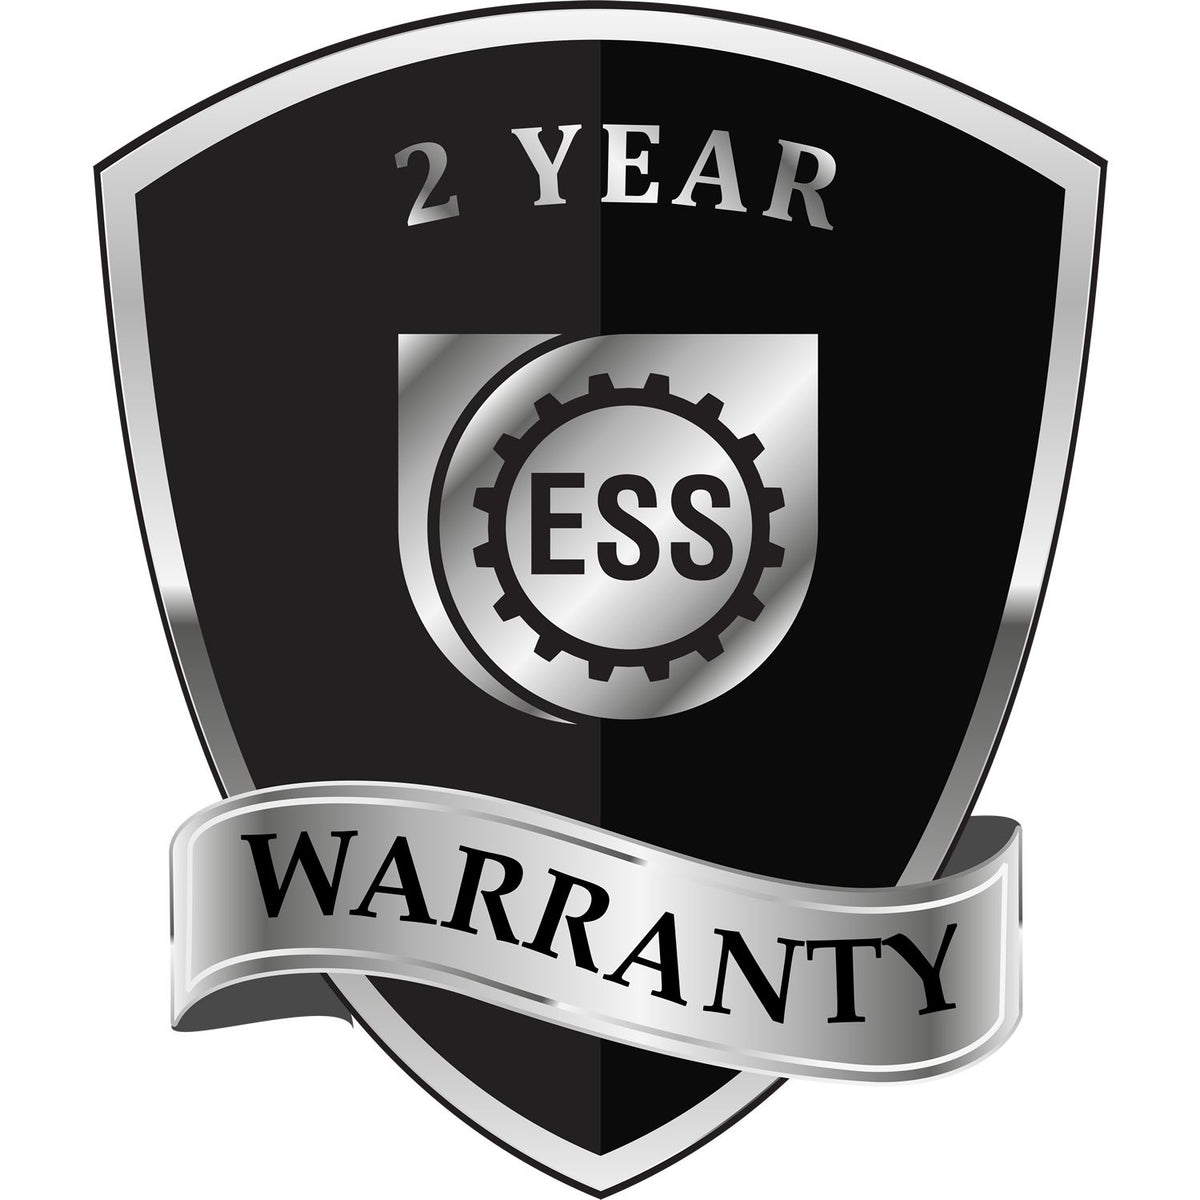 A badge or emblem showing a warranty icon for the State of North Carolina Extended Long Reach Engineer Seal